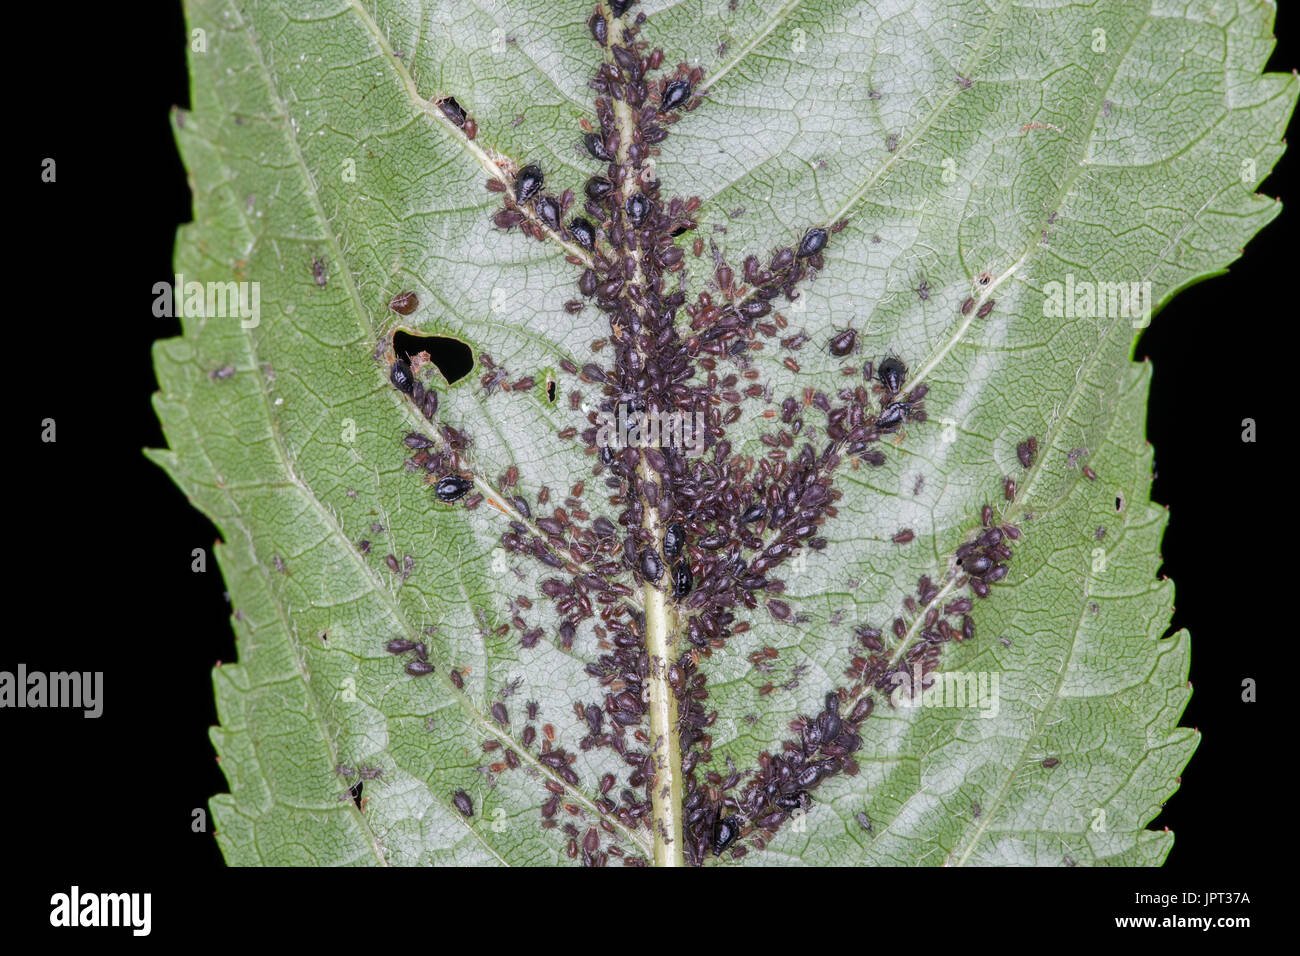 Aphids infestation on Black Cherry tree leaves Stock Photo